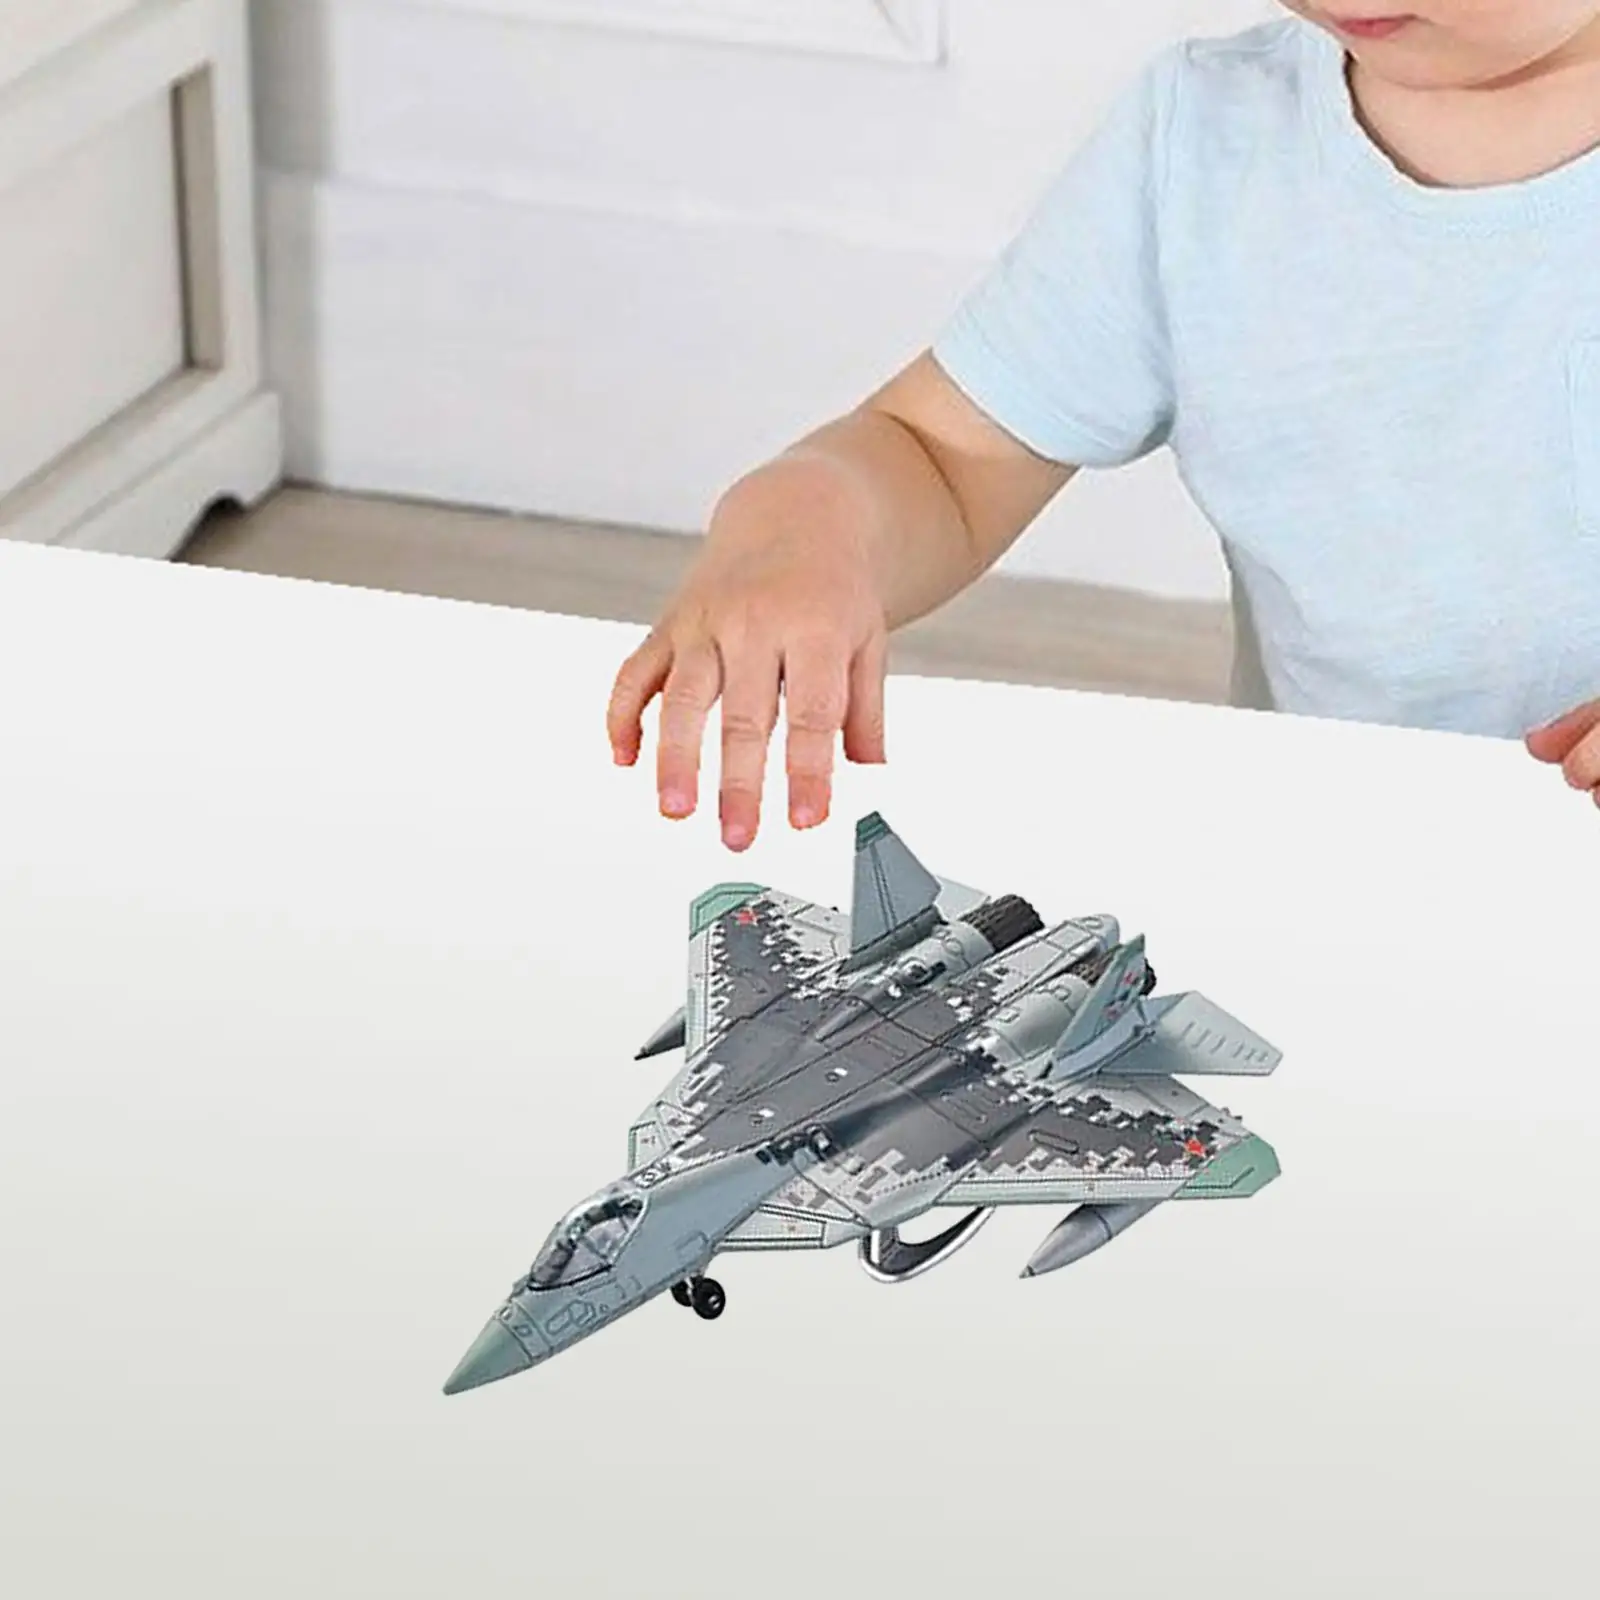 1/72 Fighter Model 3D Puzzle DIY Assemble Simulation Collectible Plane Model Brain Teaser for Adults Girls Children Gifts